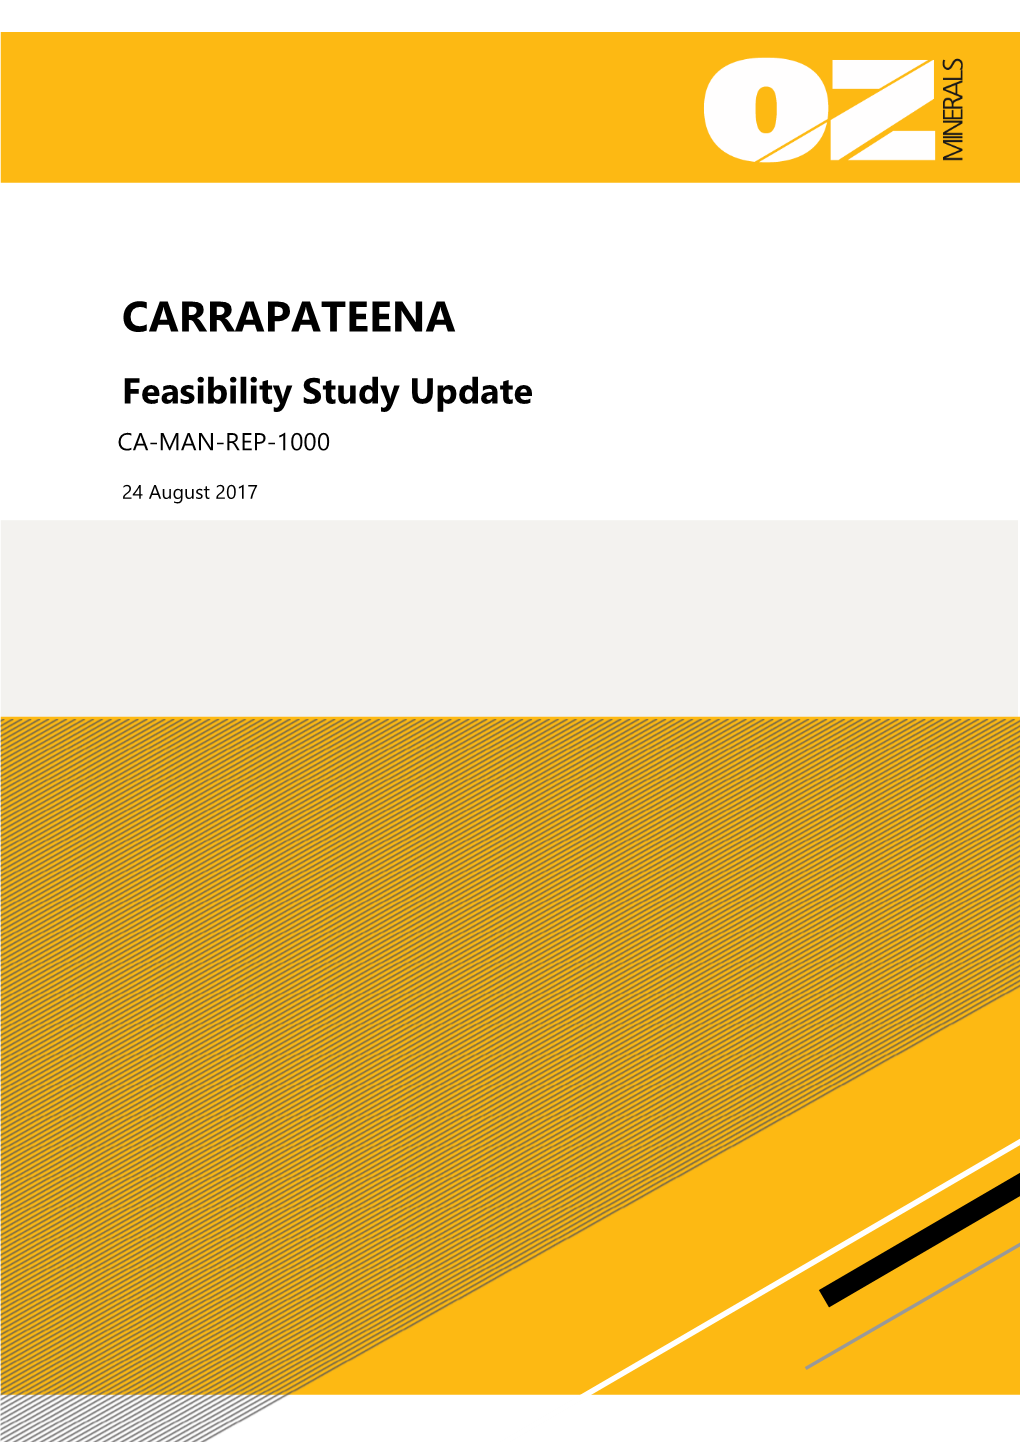 OZ Minerals Carrapateena Project Feasibility Study Update